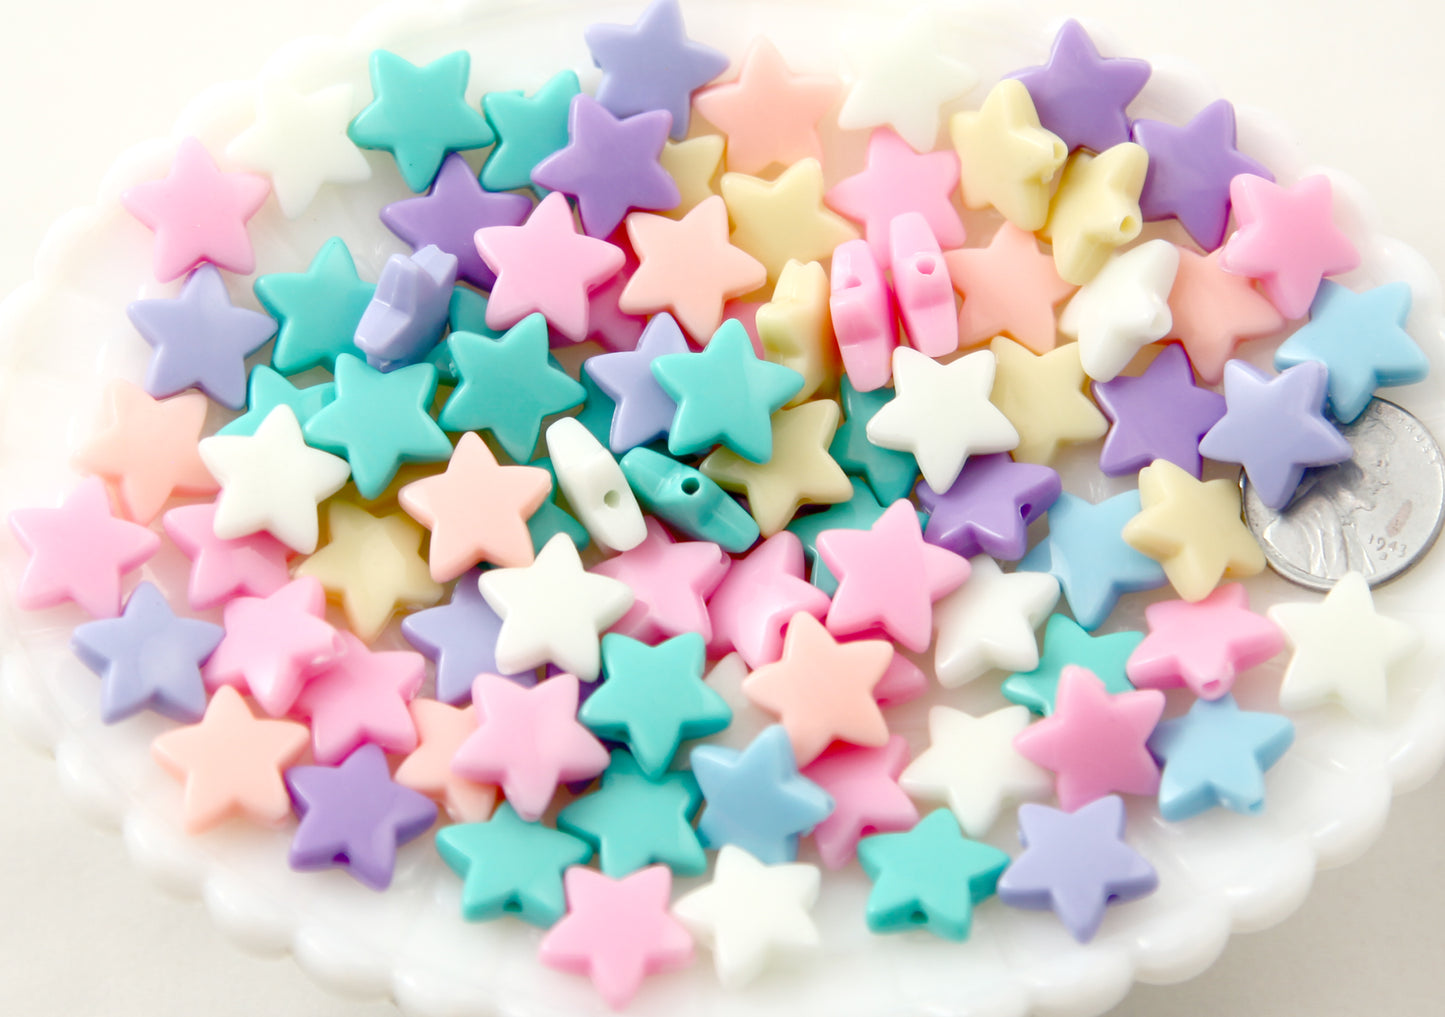 Pastel Star Beads - 14mm Rounded Pastel Star Acrylic or Resin Beads - 100 pcs set